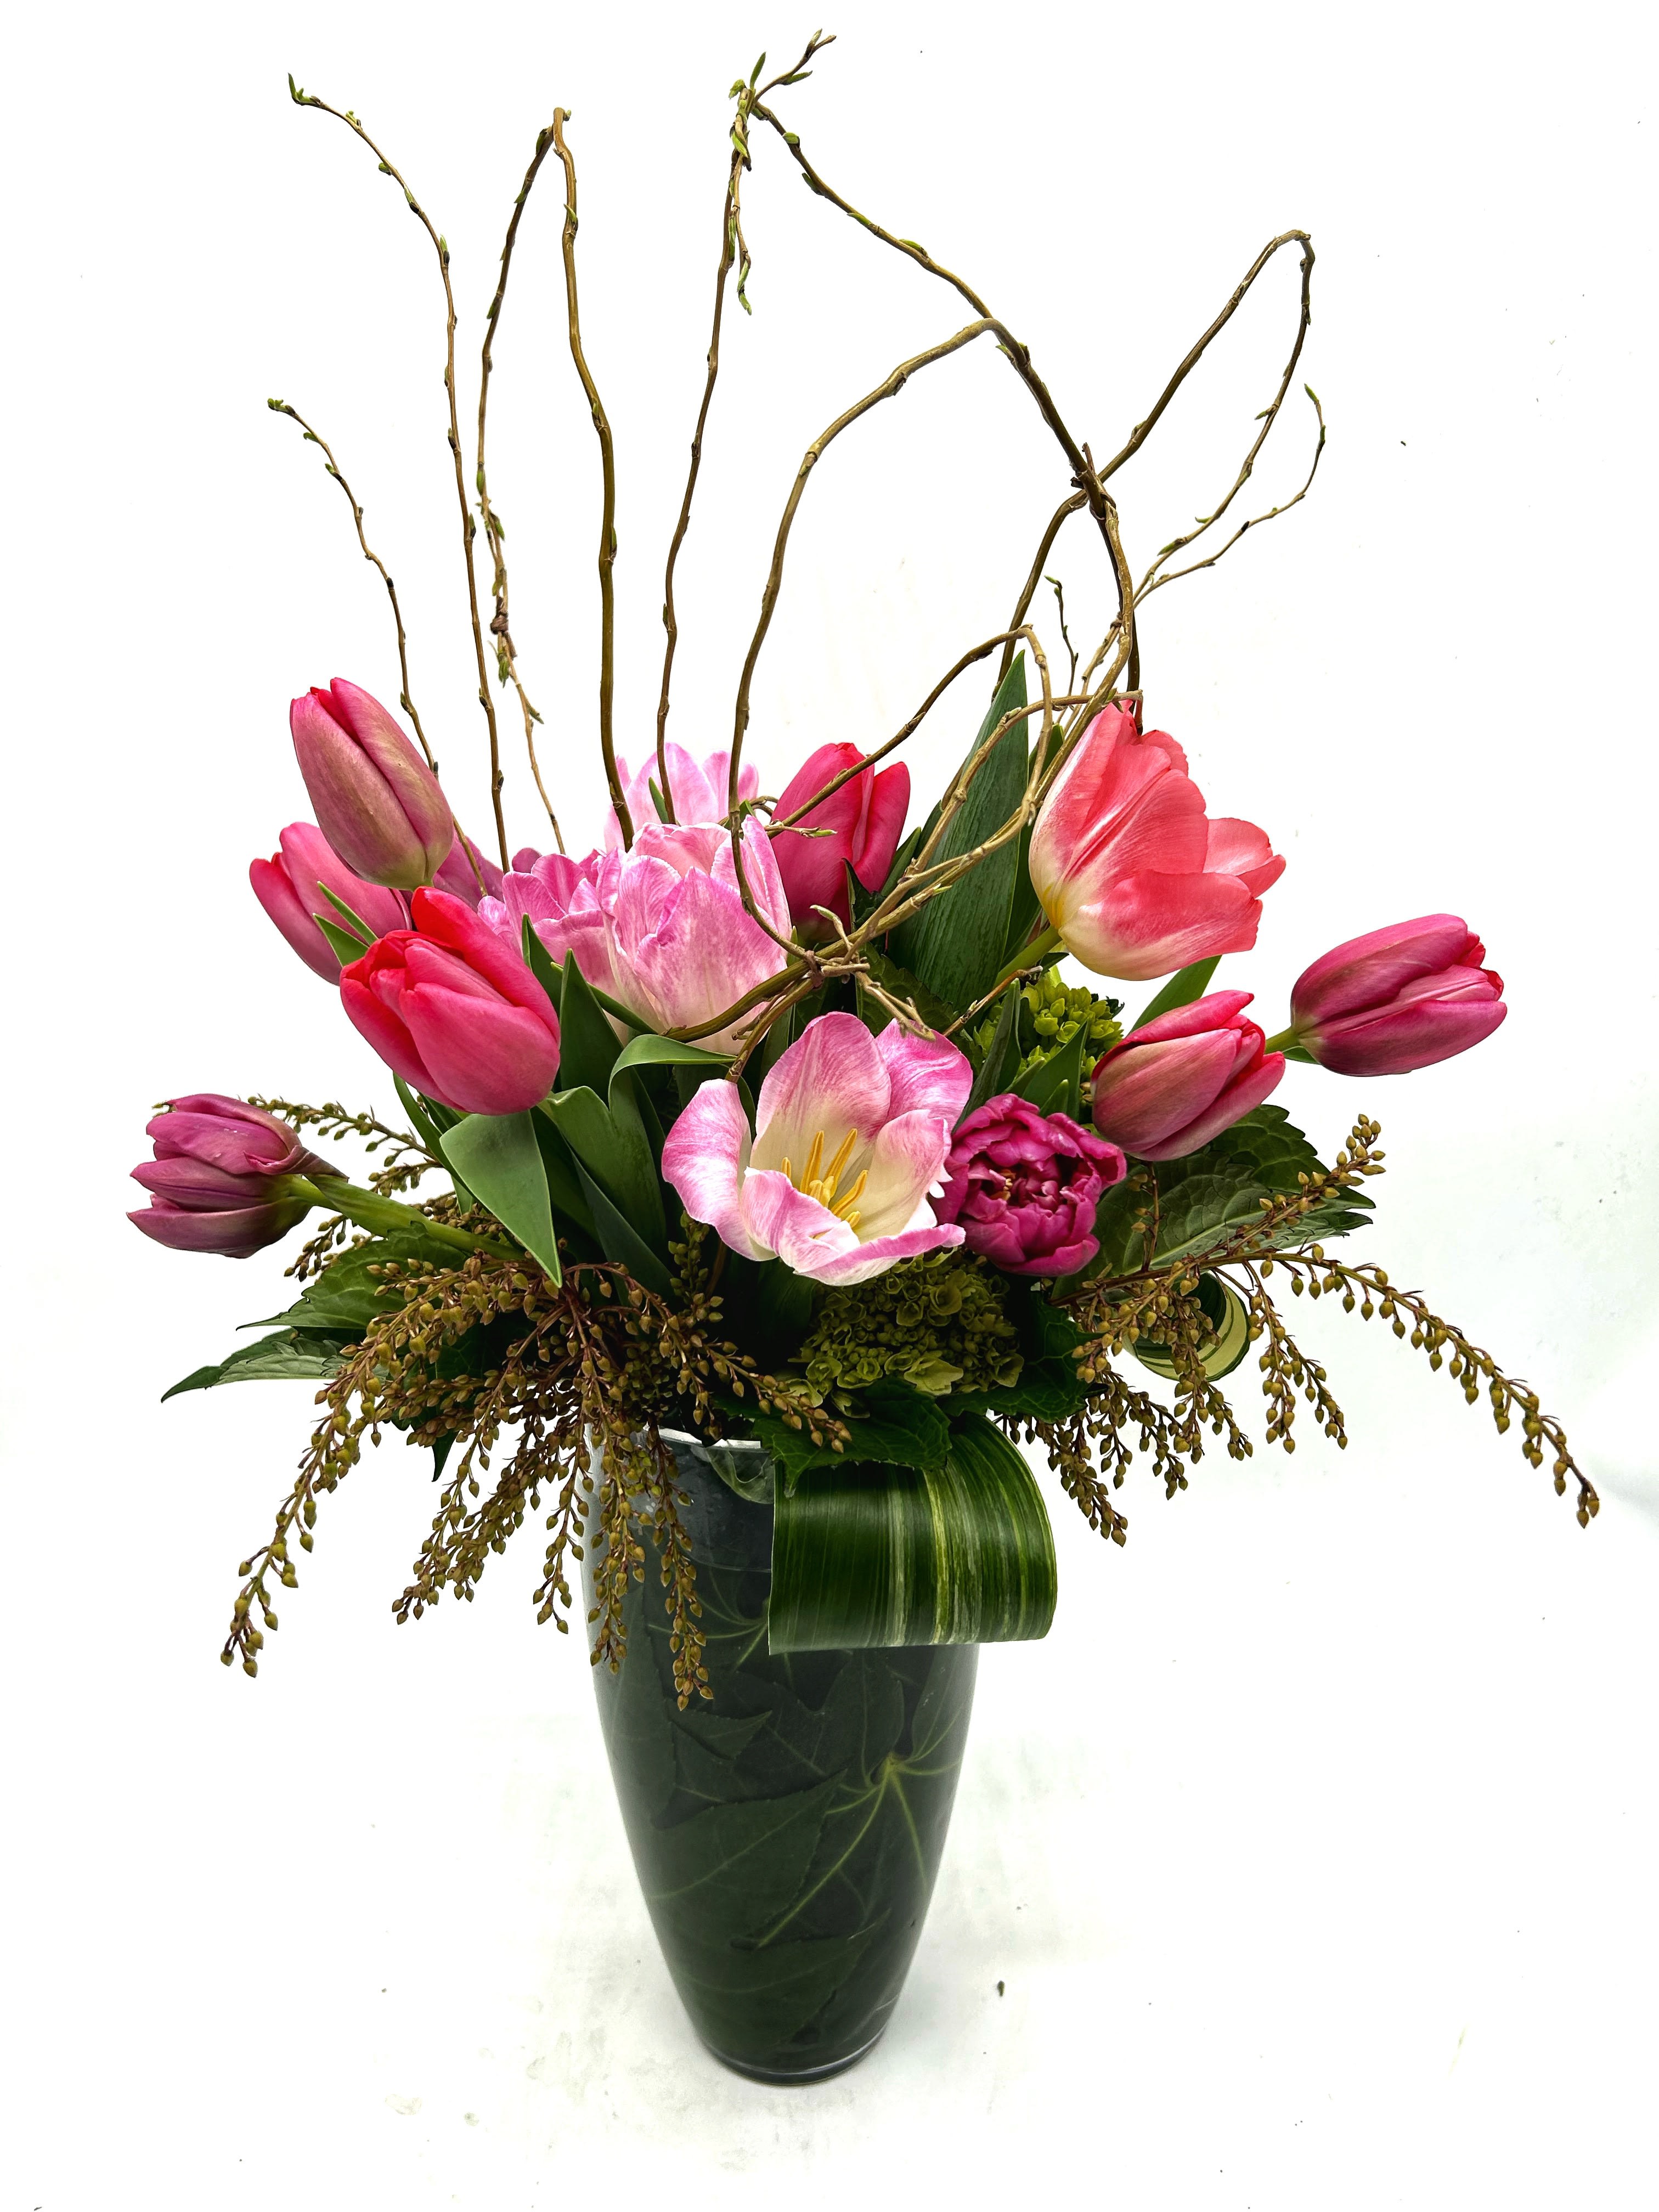 Treasured Tulips  - All tulips with curly willow and greenery. Lush mix of 15 tulips in shades of purple and pink.